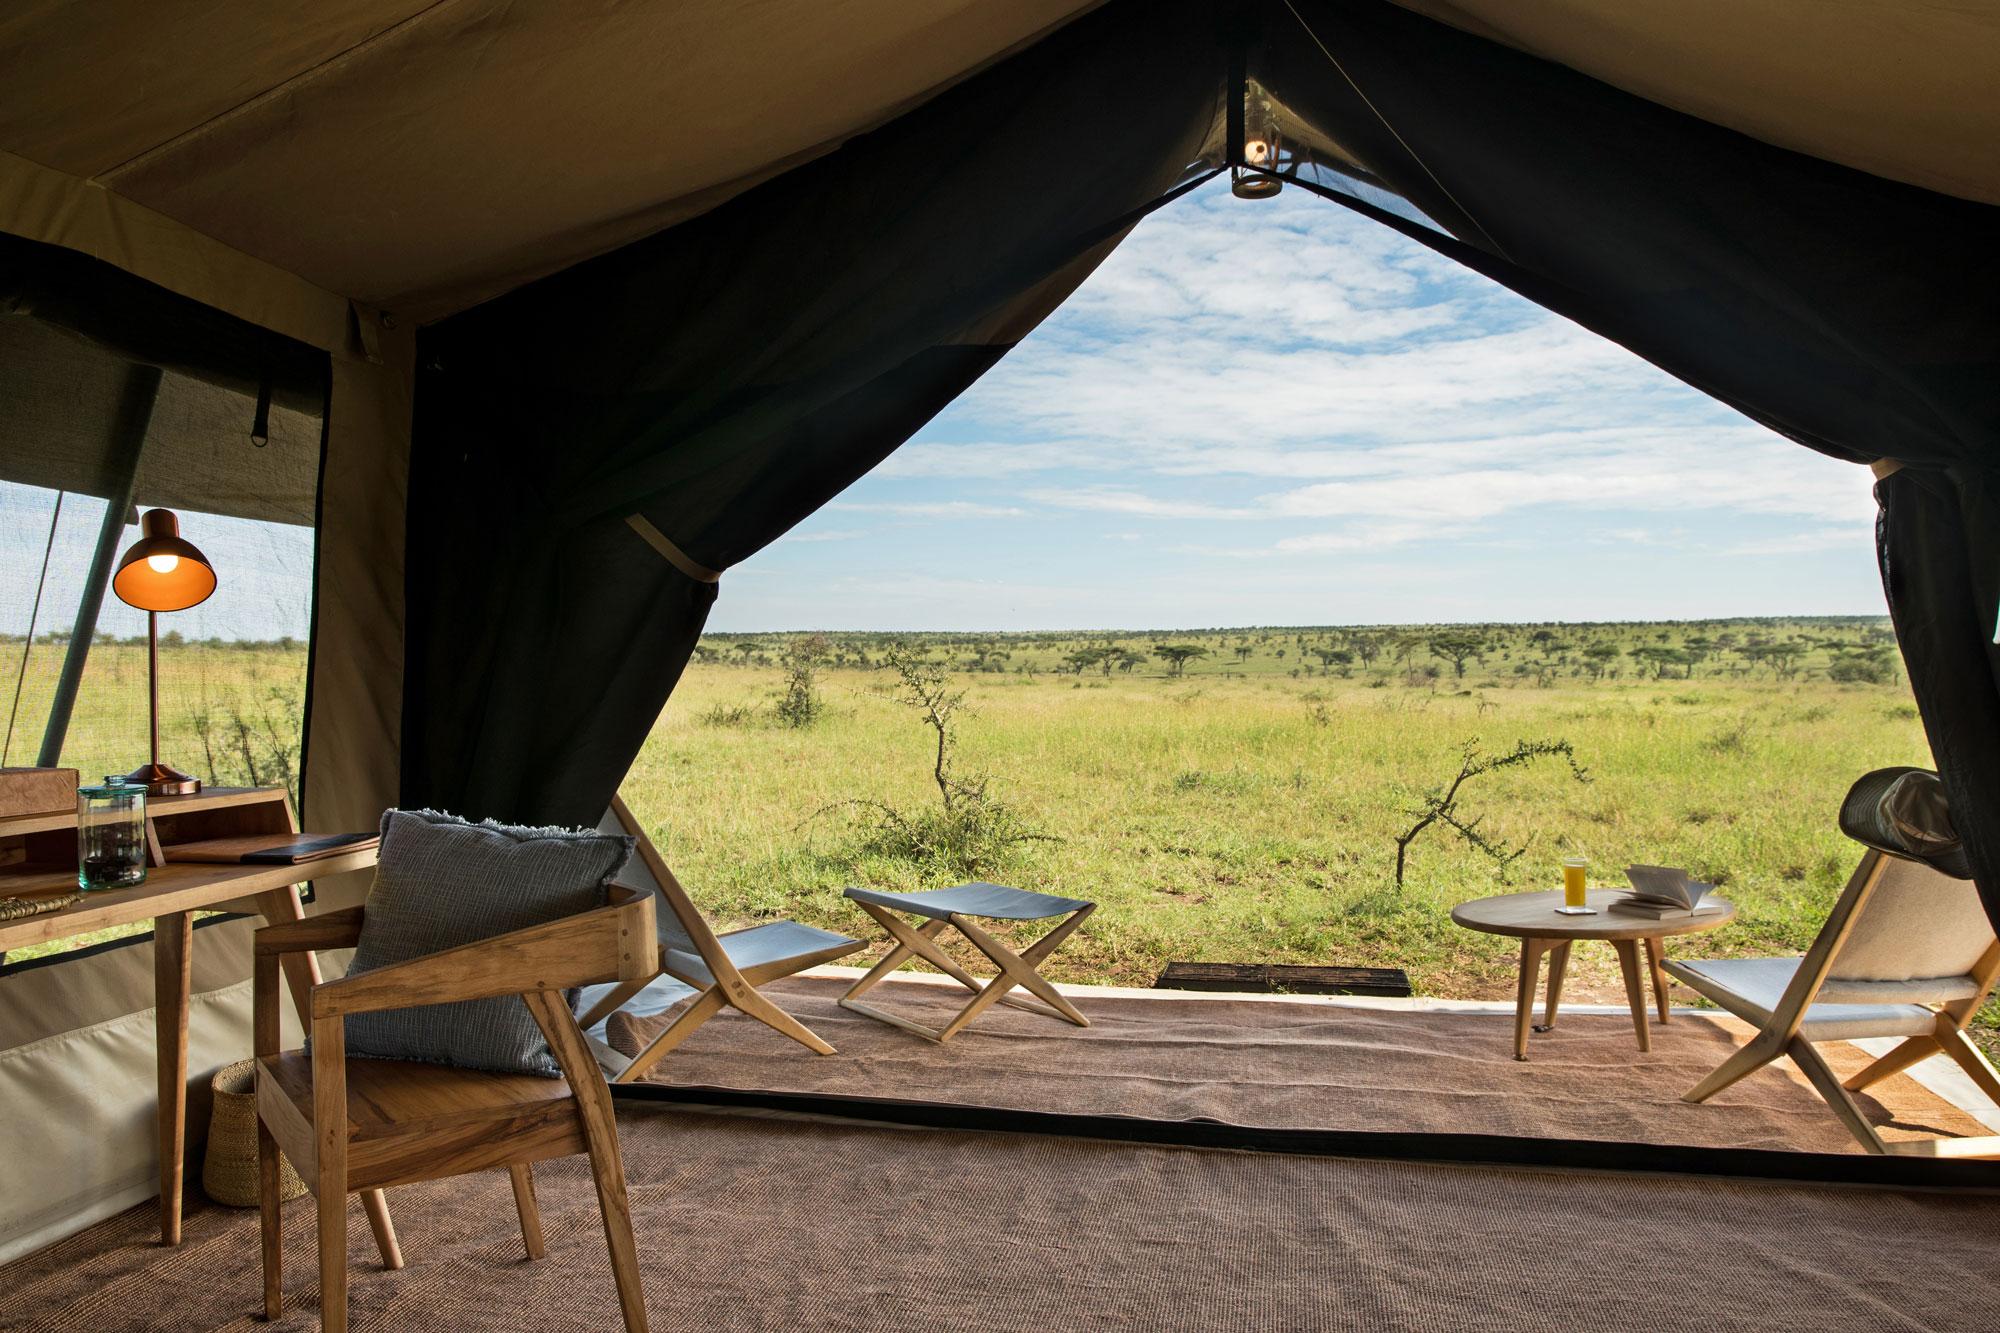 Tent at Legendary Serengeti Mobile Camp - Tanzania Safari Tours: Ultimate  Northern Circuit Package - Africa Endeavours